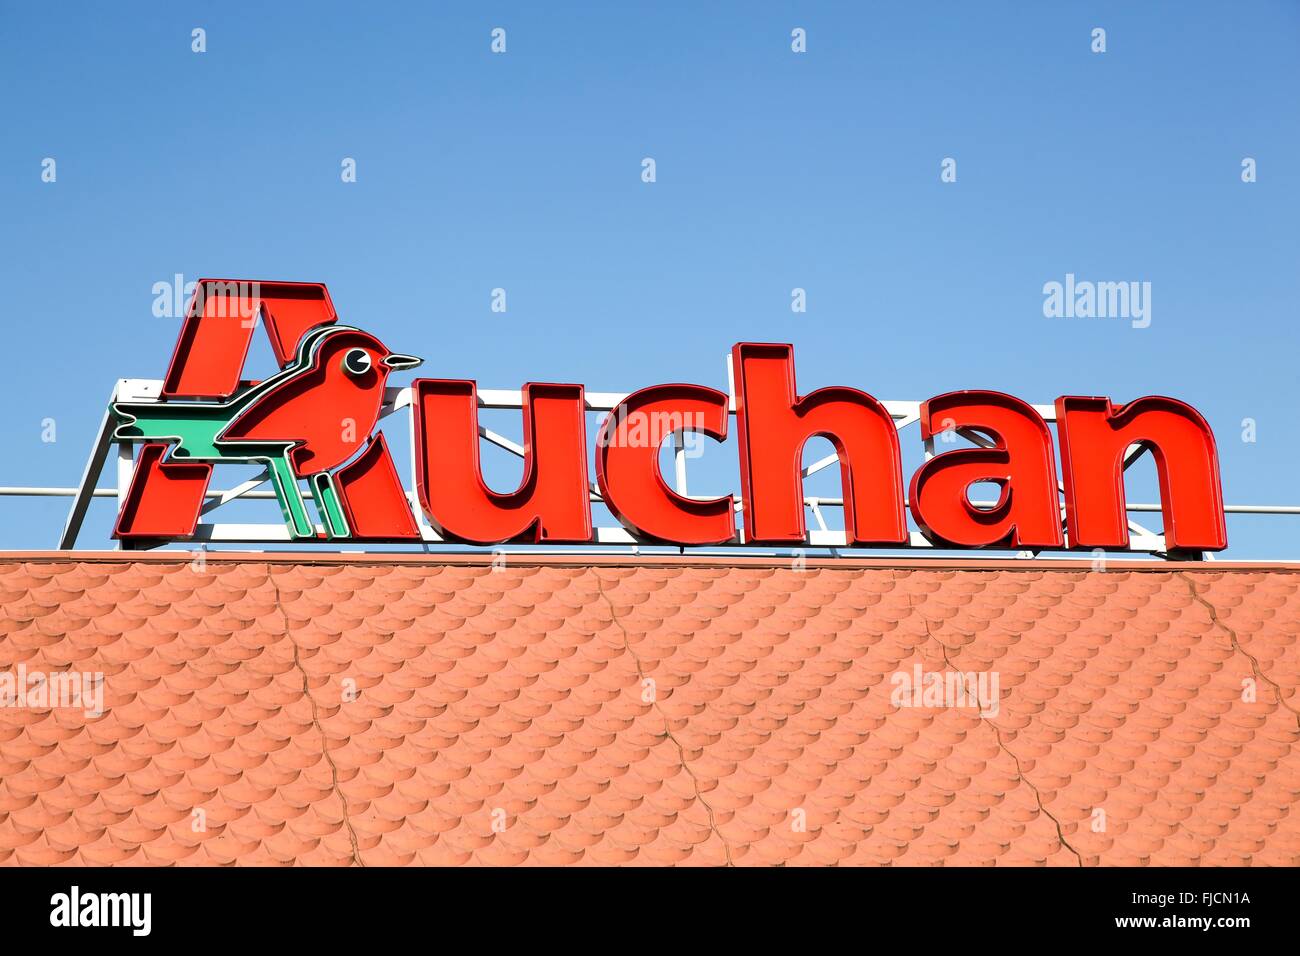 Auchan sign on a roof Stock Photo